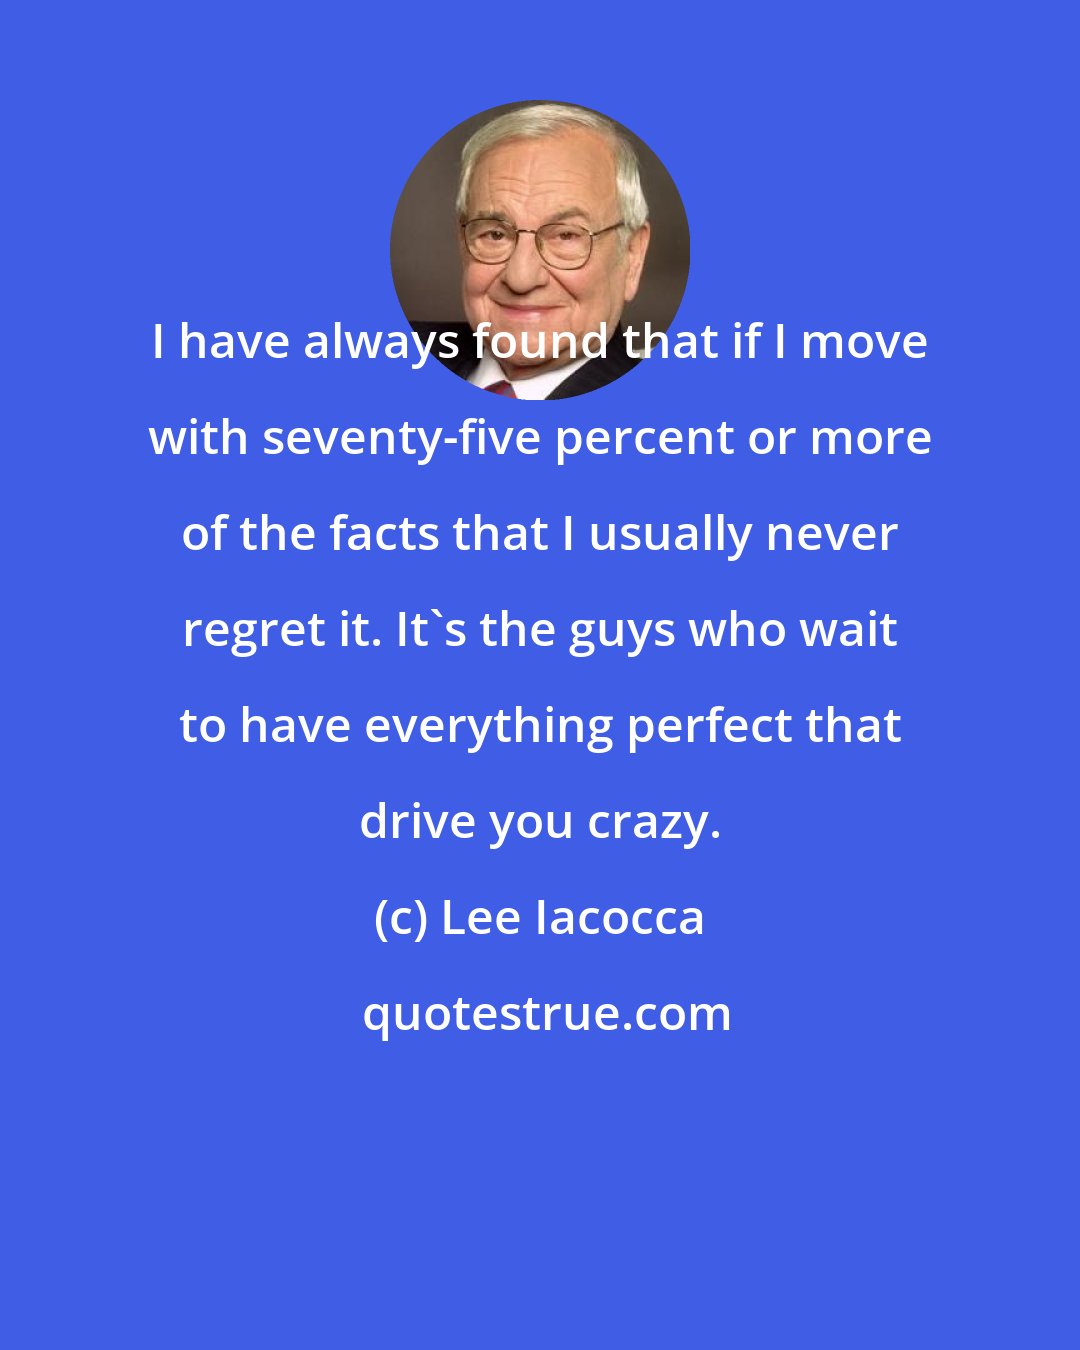 Lee Iacocca: I have always found that if I move with seventy-five percent or more of the facts that I usually never regret it. It's the guys who wait to have everything perfect that drive you crazy.